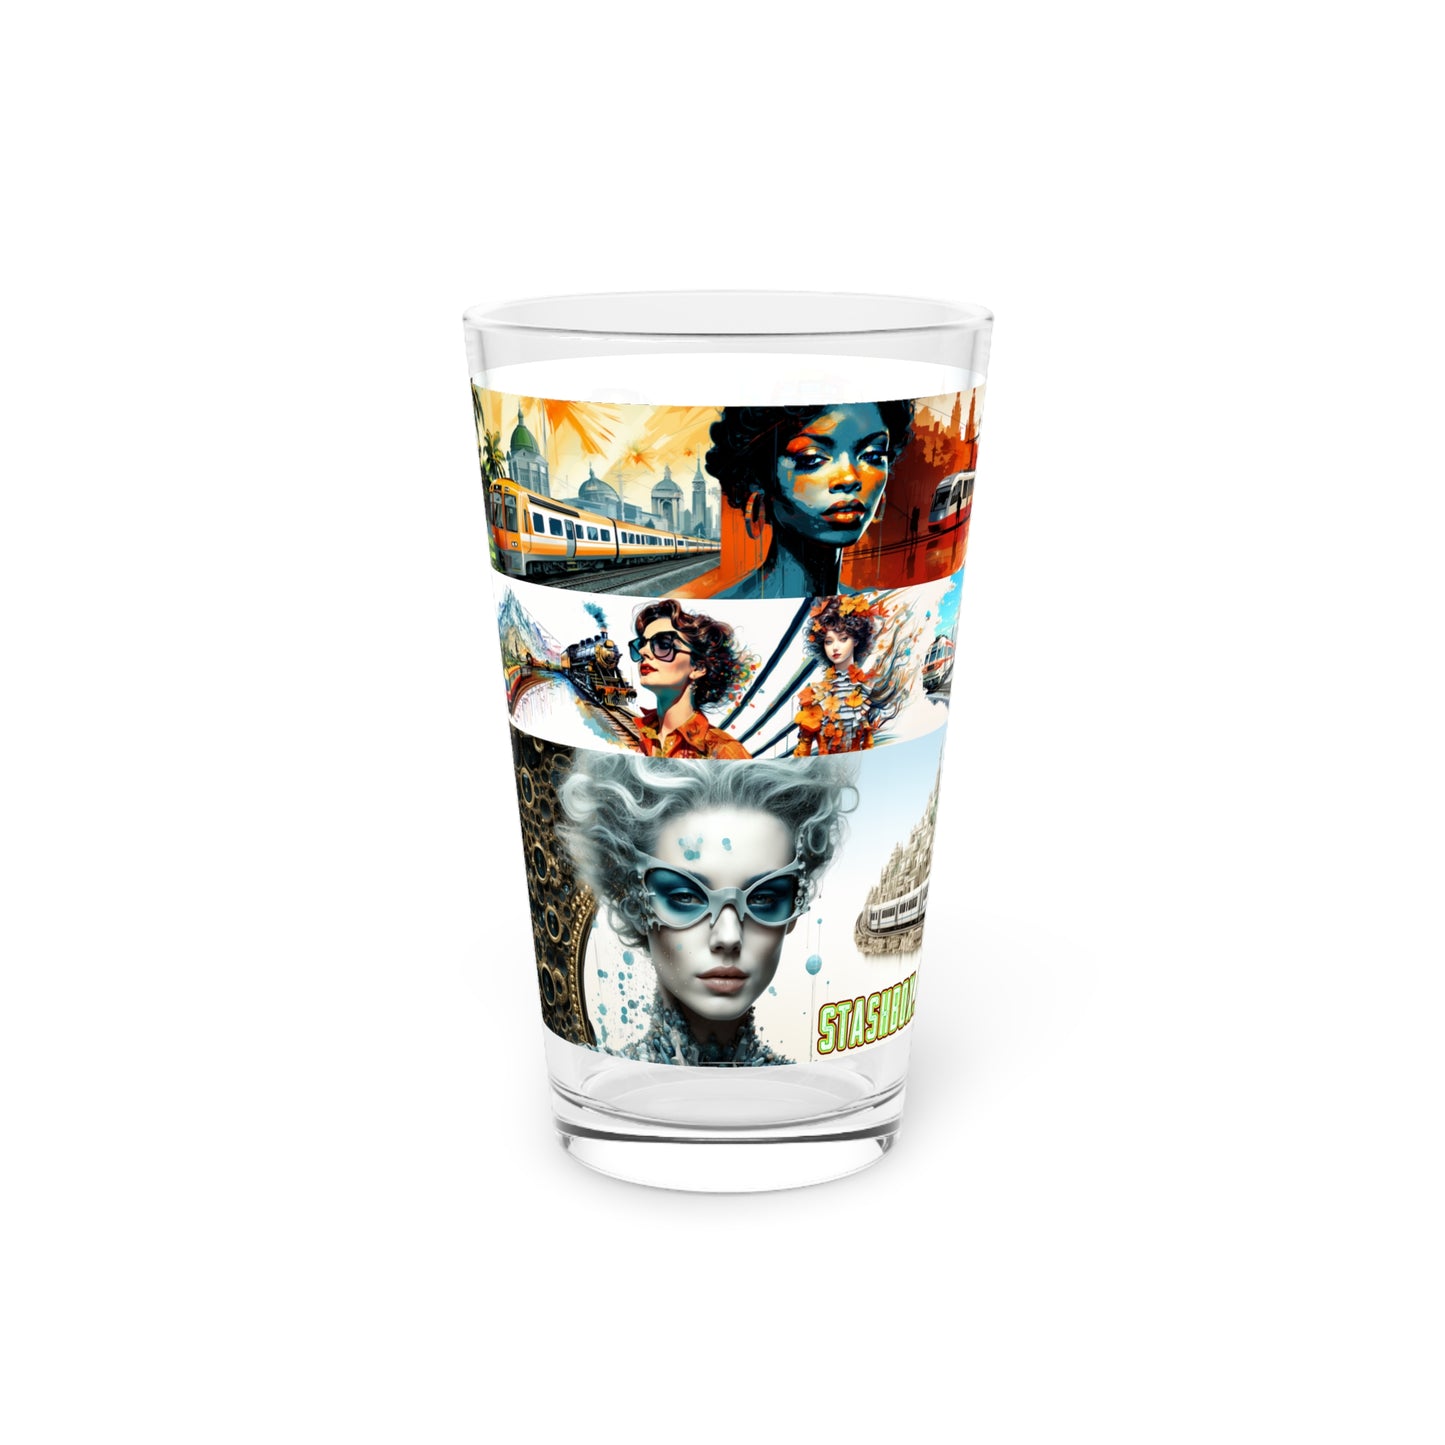 Extra Special 3-in-1 Train Montage Pint Glass - Stashbox Exclusive